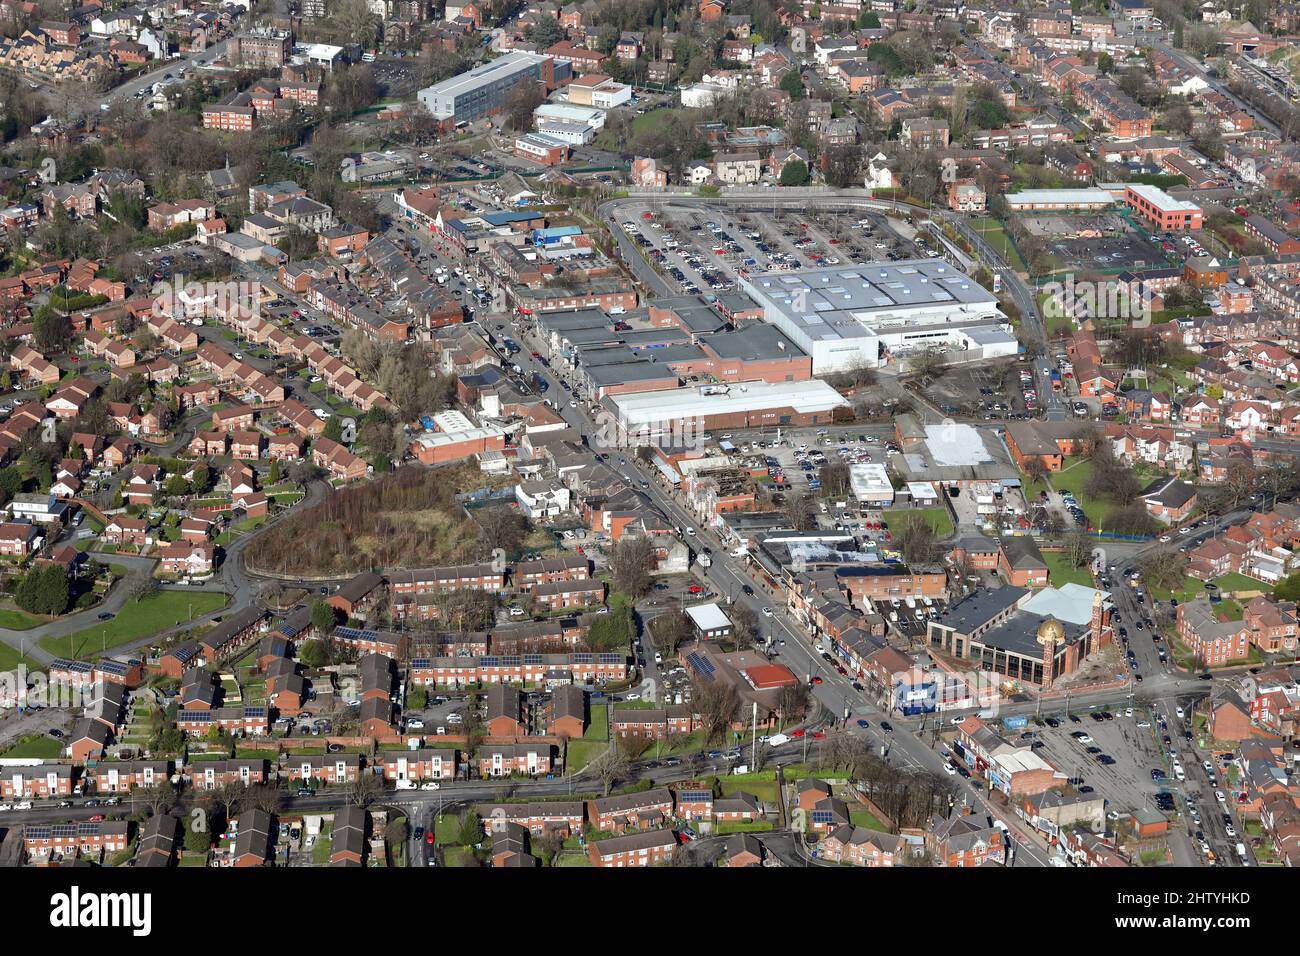 aerial view of Cheetham Hill looking North up Bury Old Road A665 towards the shops including the Tesco Superstore & Cheetham Hill Shopping Centre Stock Photo